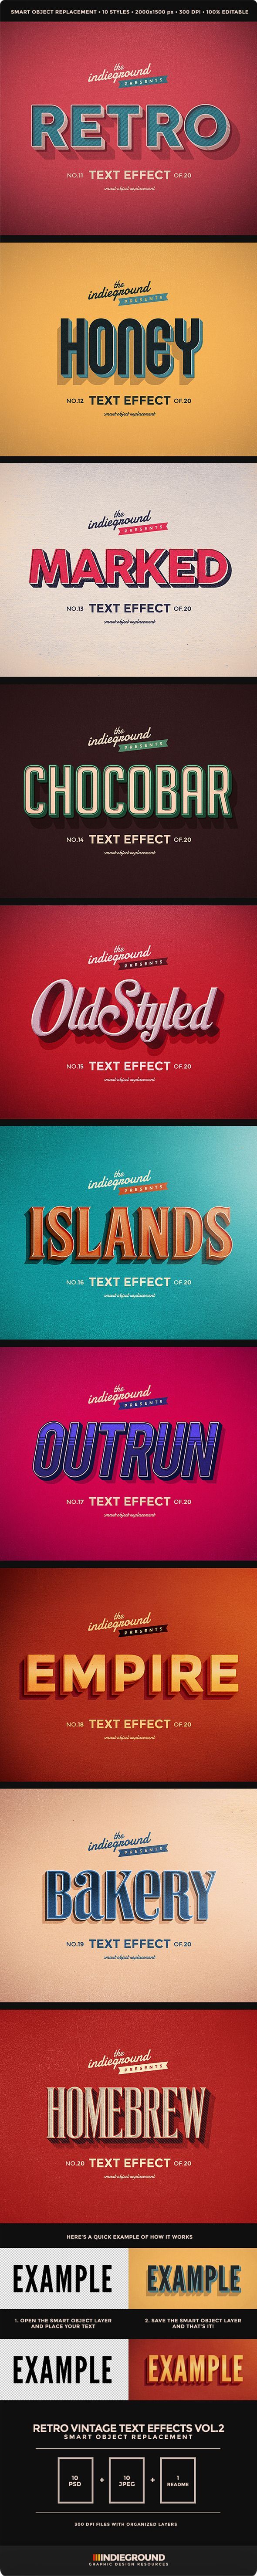 Title Ideas  Retro Vintage Text Effects Vol. 2 – Text Effects Actions $5